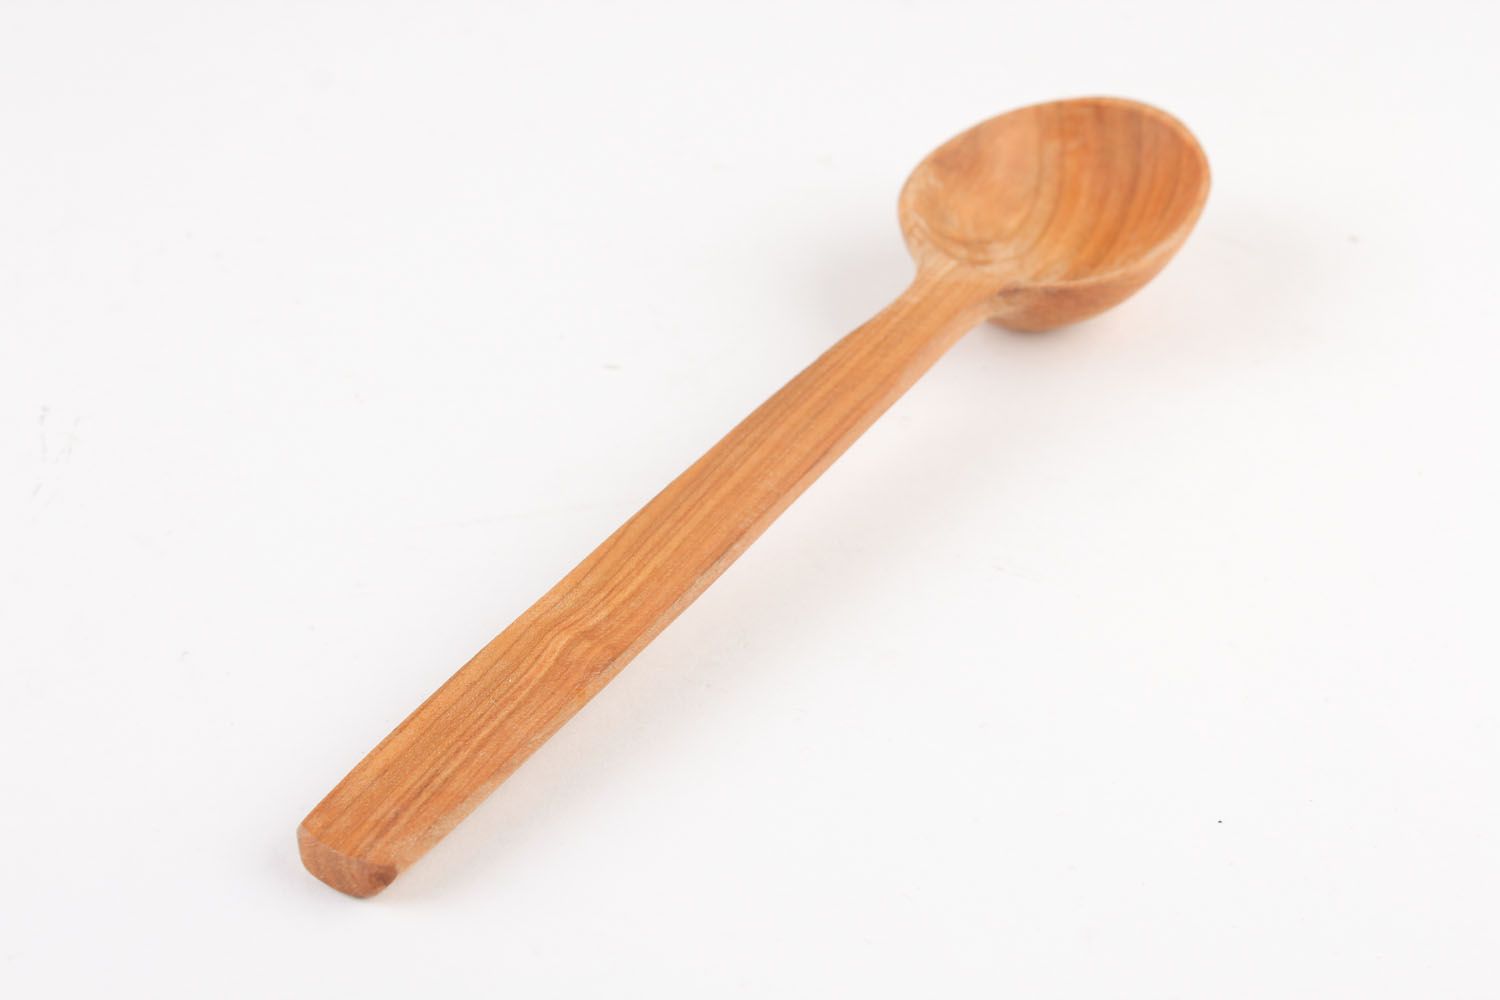 Homemade wooden spoon photo 2